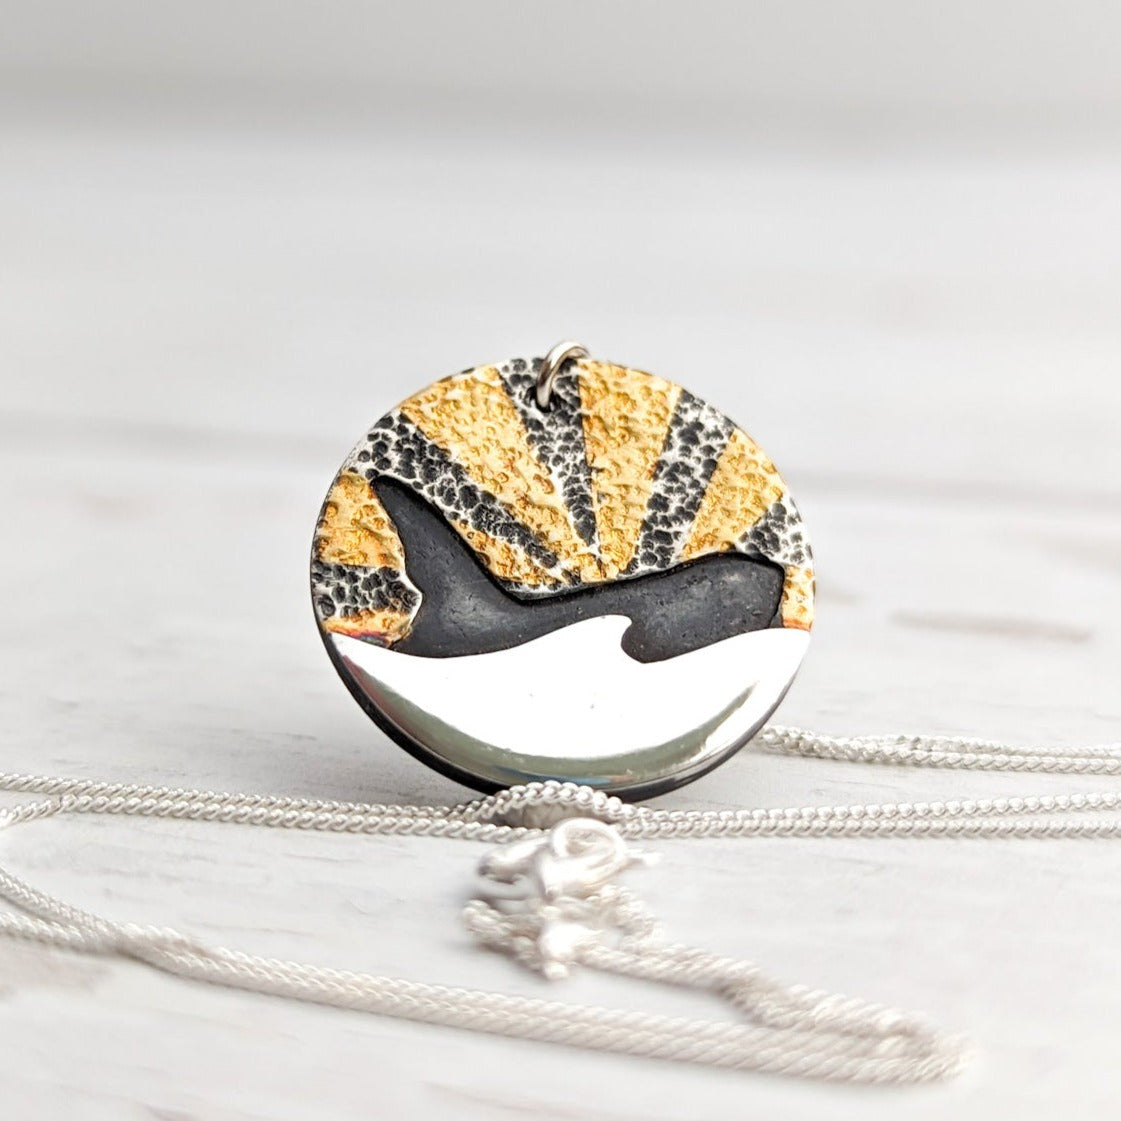 Stunning orca coin pendant with 24 carat gold detail